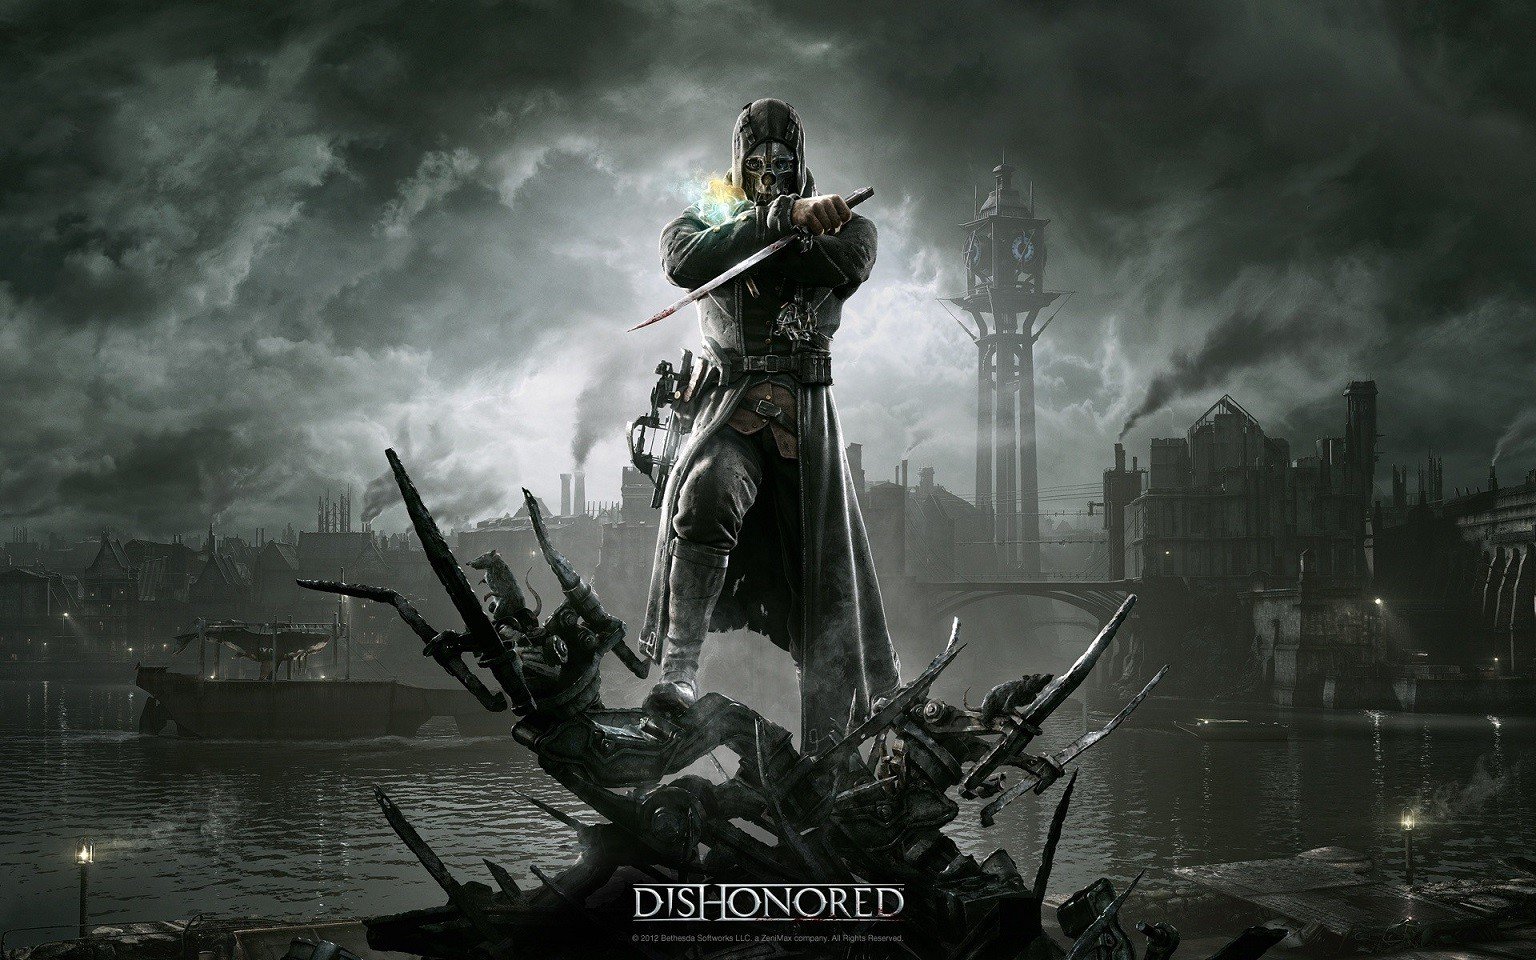 Dishonored Wallpaper